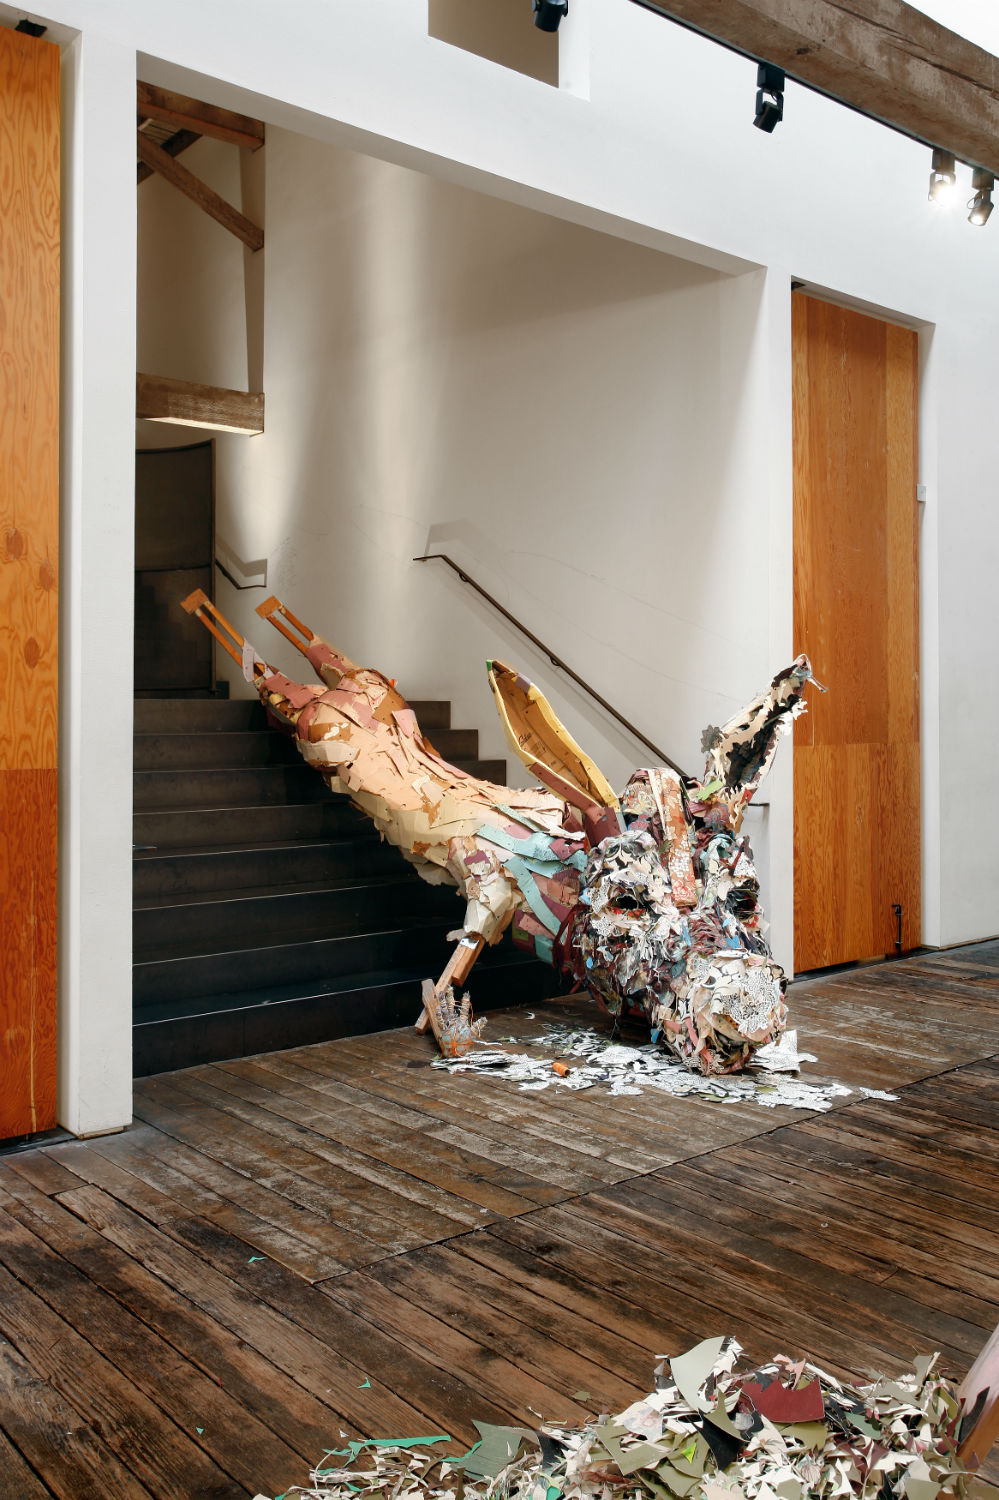 Installation view, Suyama Space, Seattle, 2015